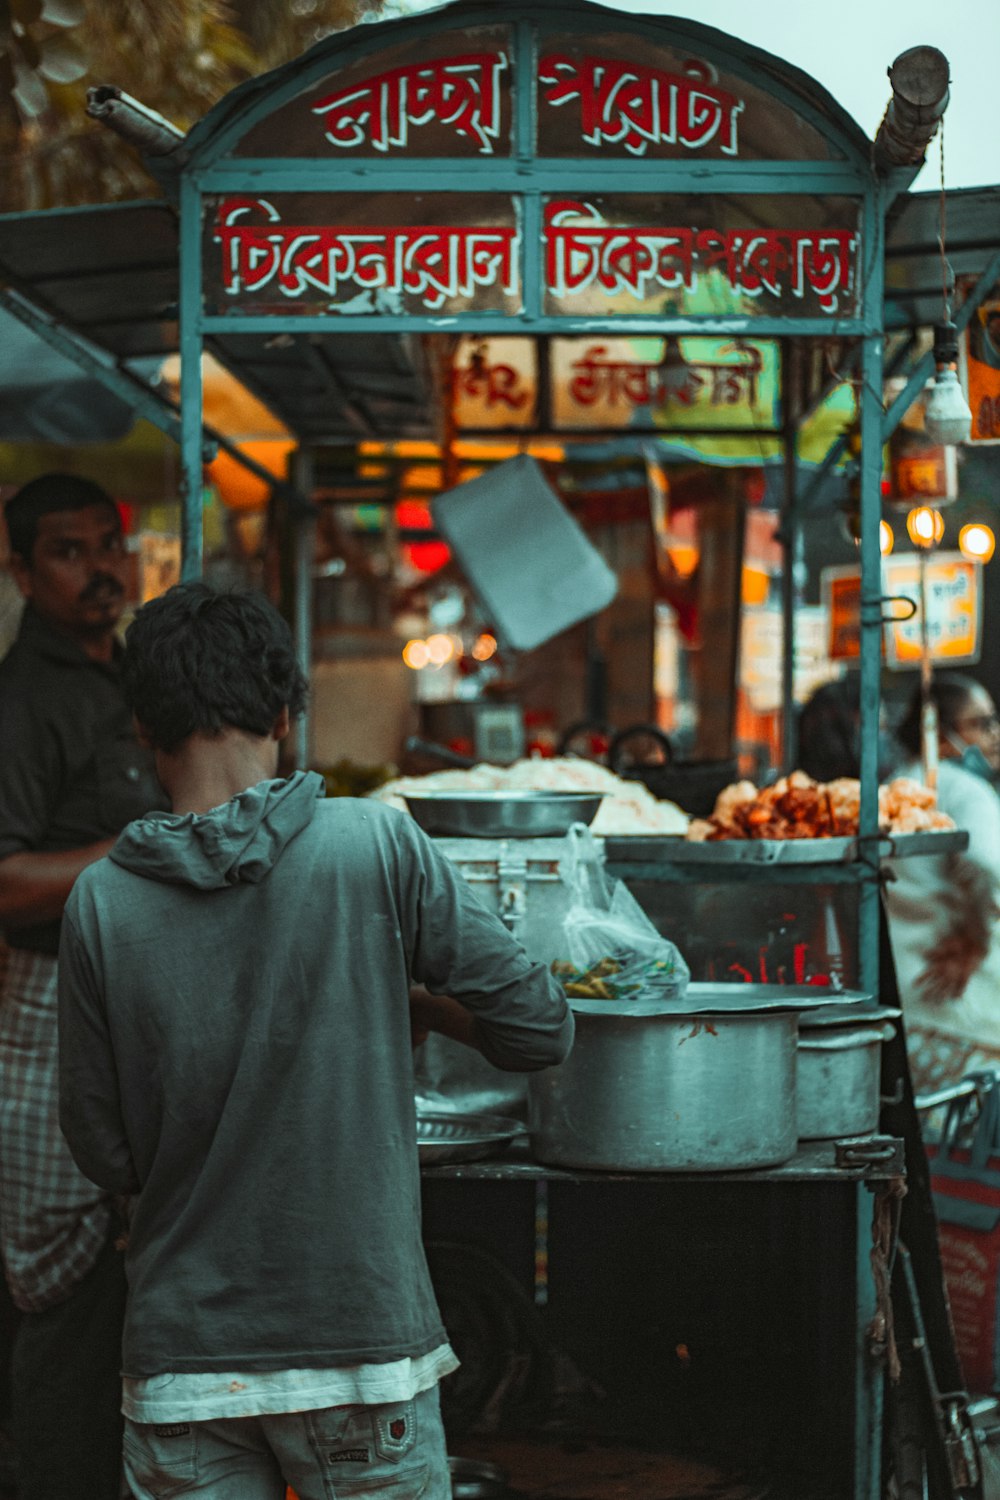 man in gray jacket standing in front of food stall during daytime